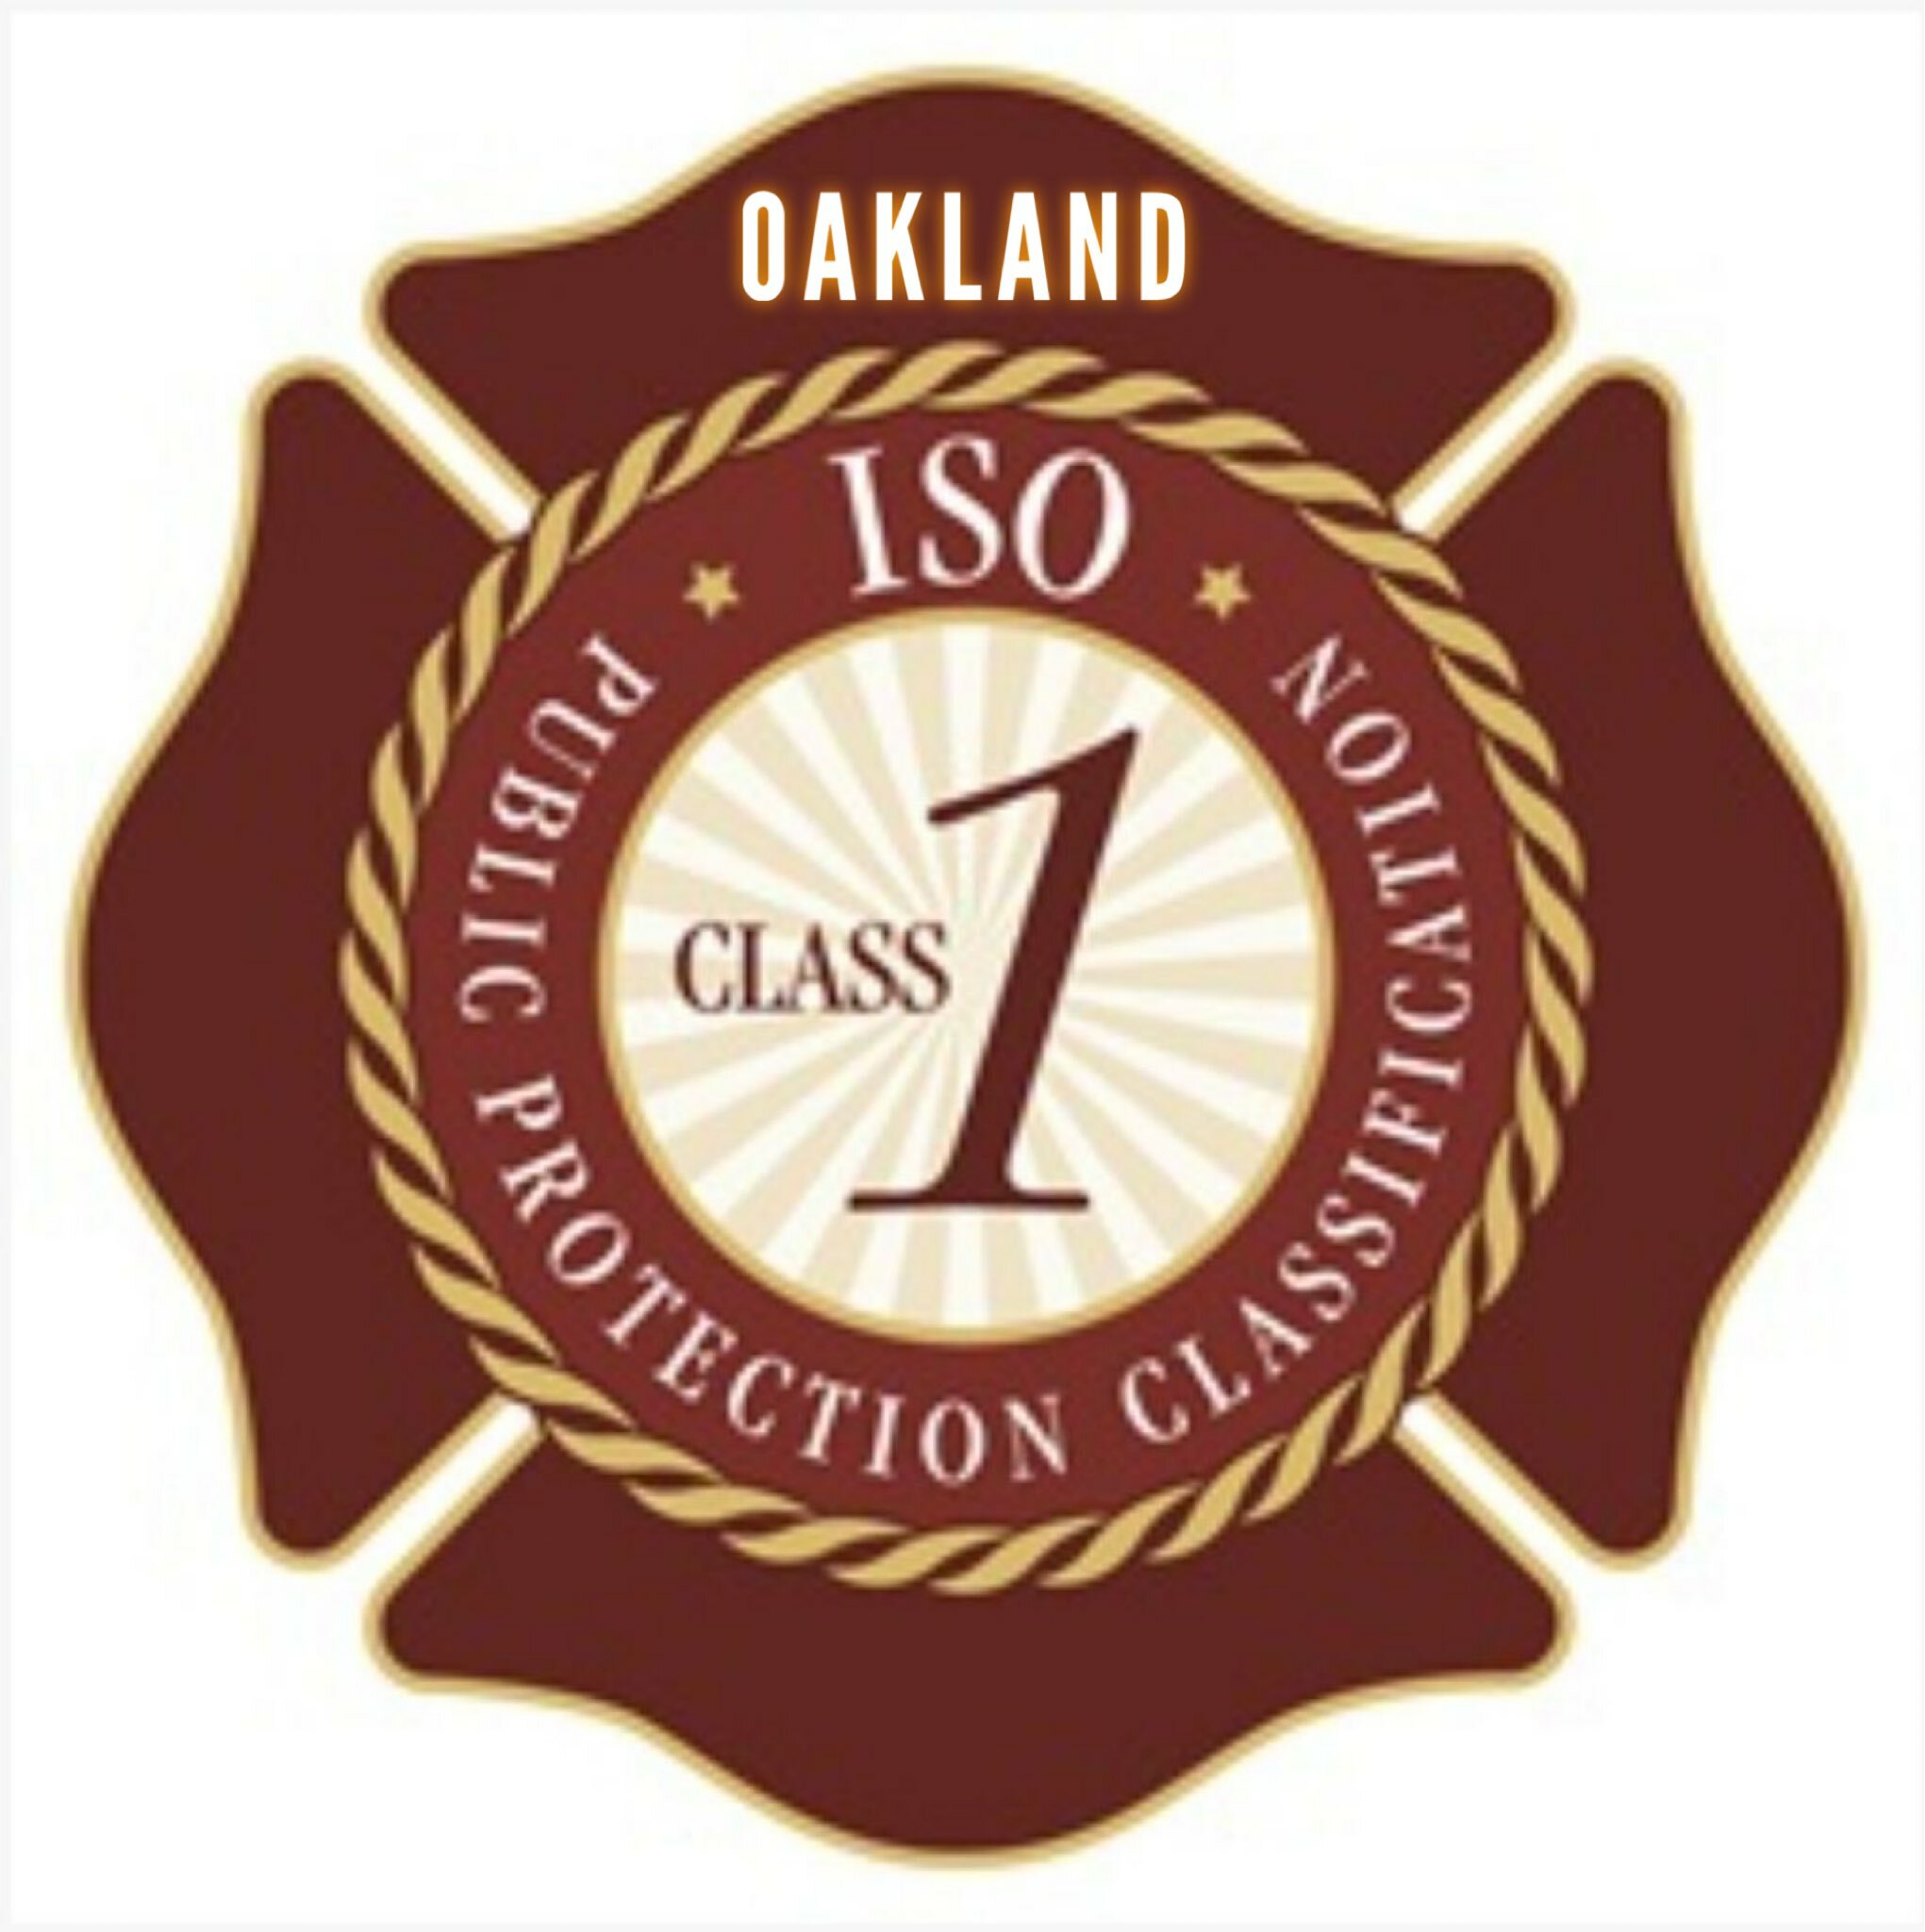 This is a logo showing the new rating for OFD